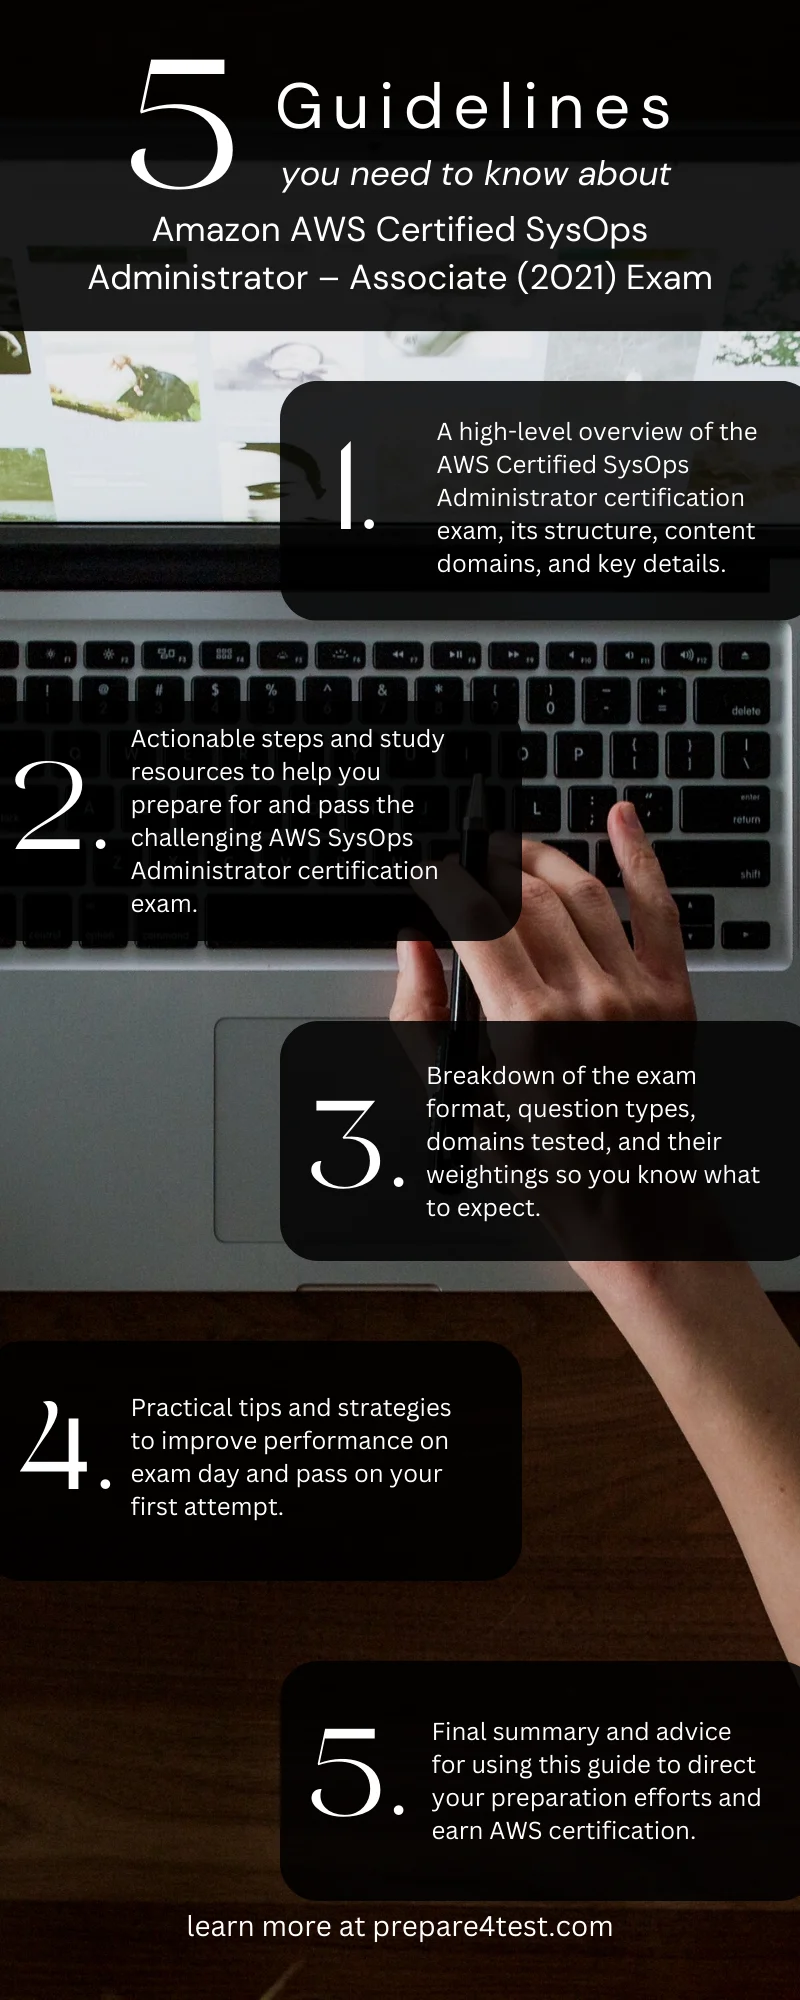 AWS Certified SysOps Administrator - Associate Exam Code Infographic